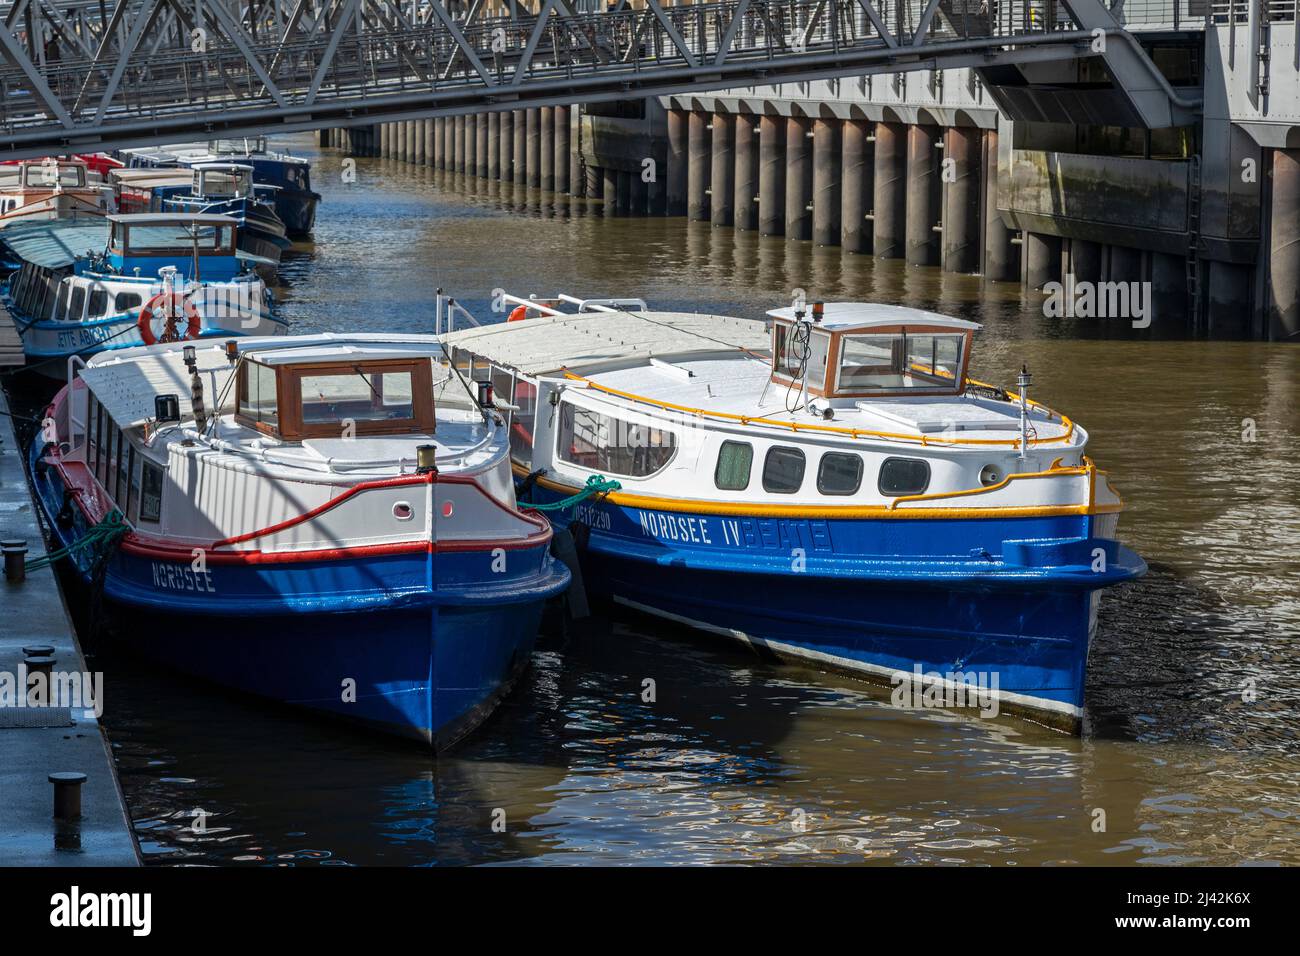 Typical excursion boats, barges, jetties, Harbour, Hamburg, Germany Stock Photo